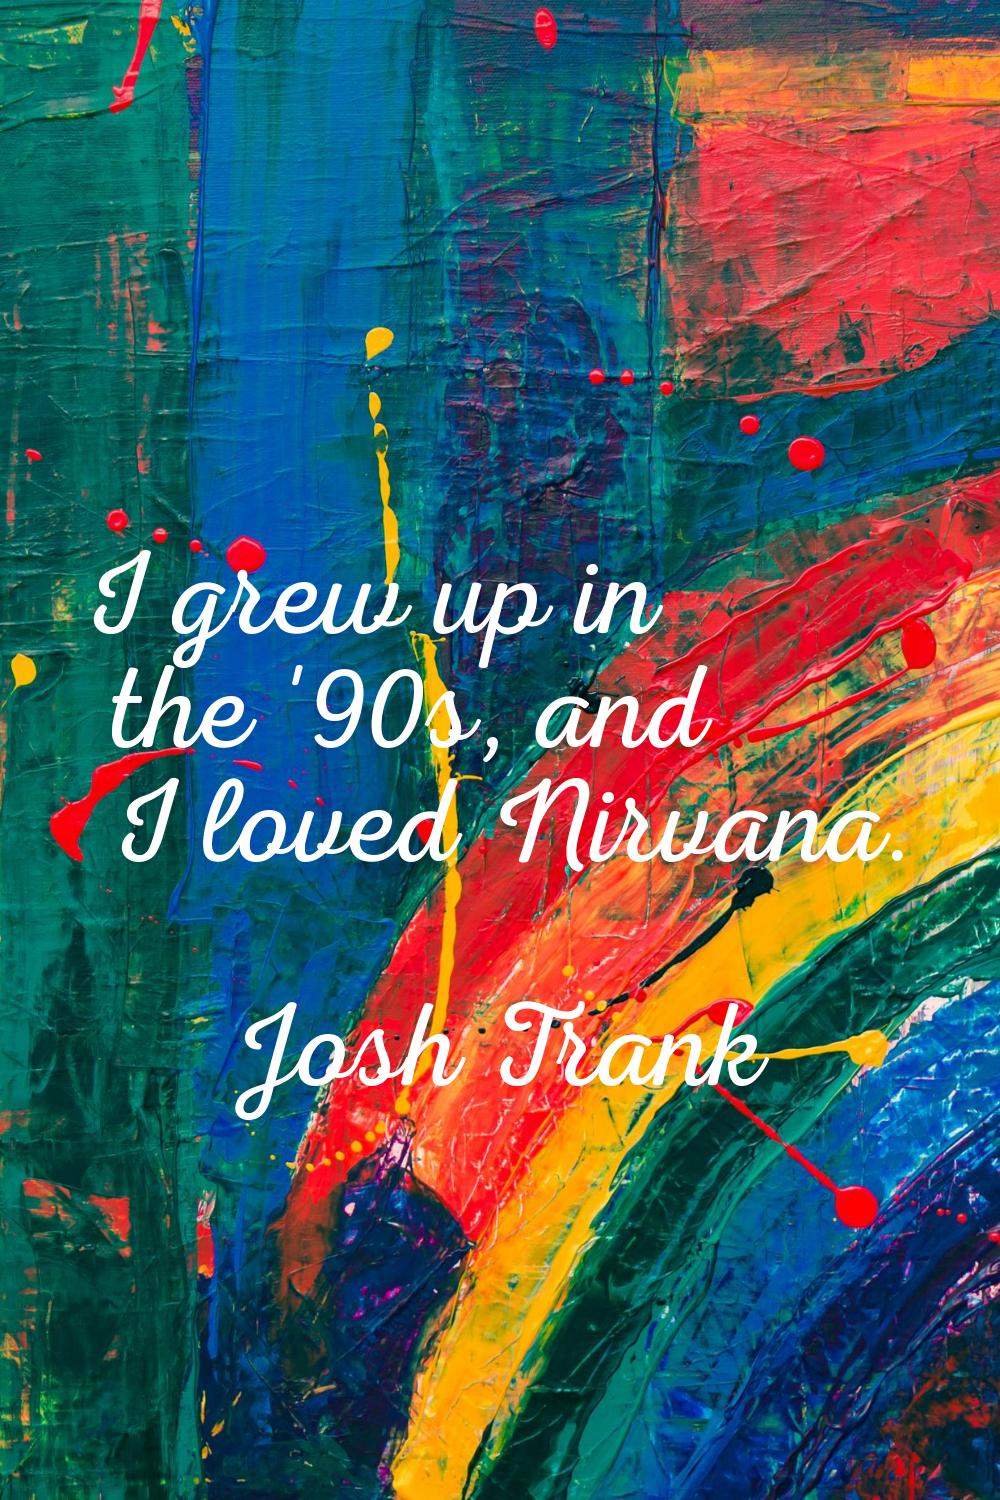 I grew up in the '90s, and I loved Nirvana.